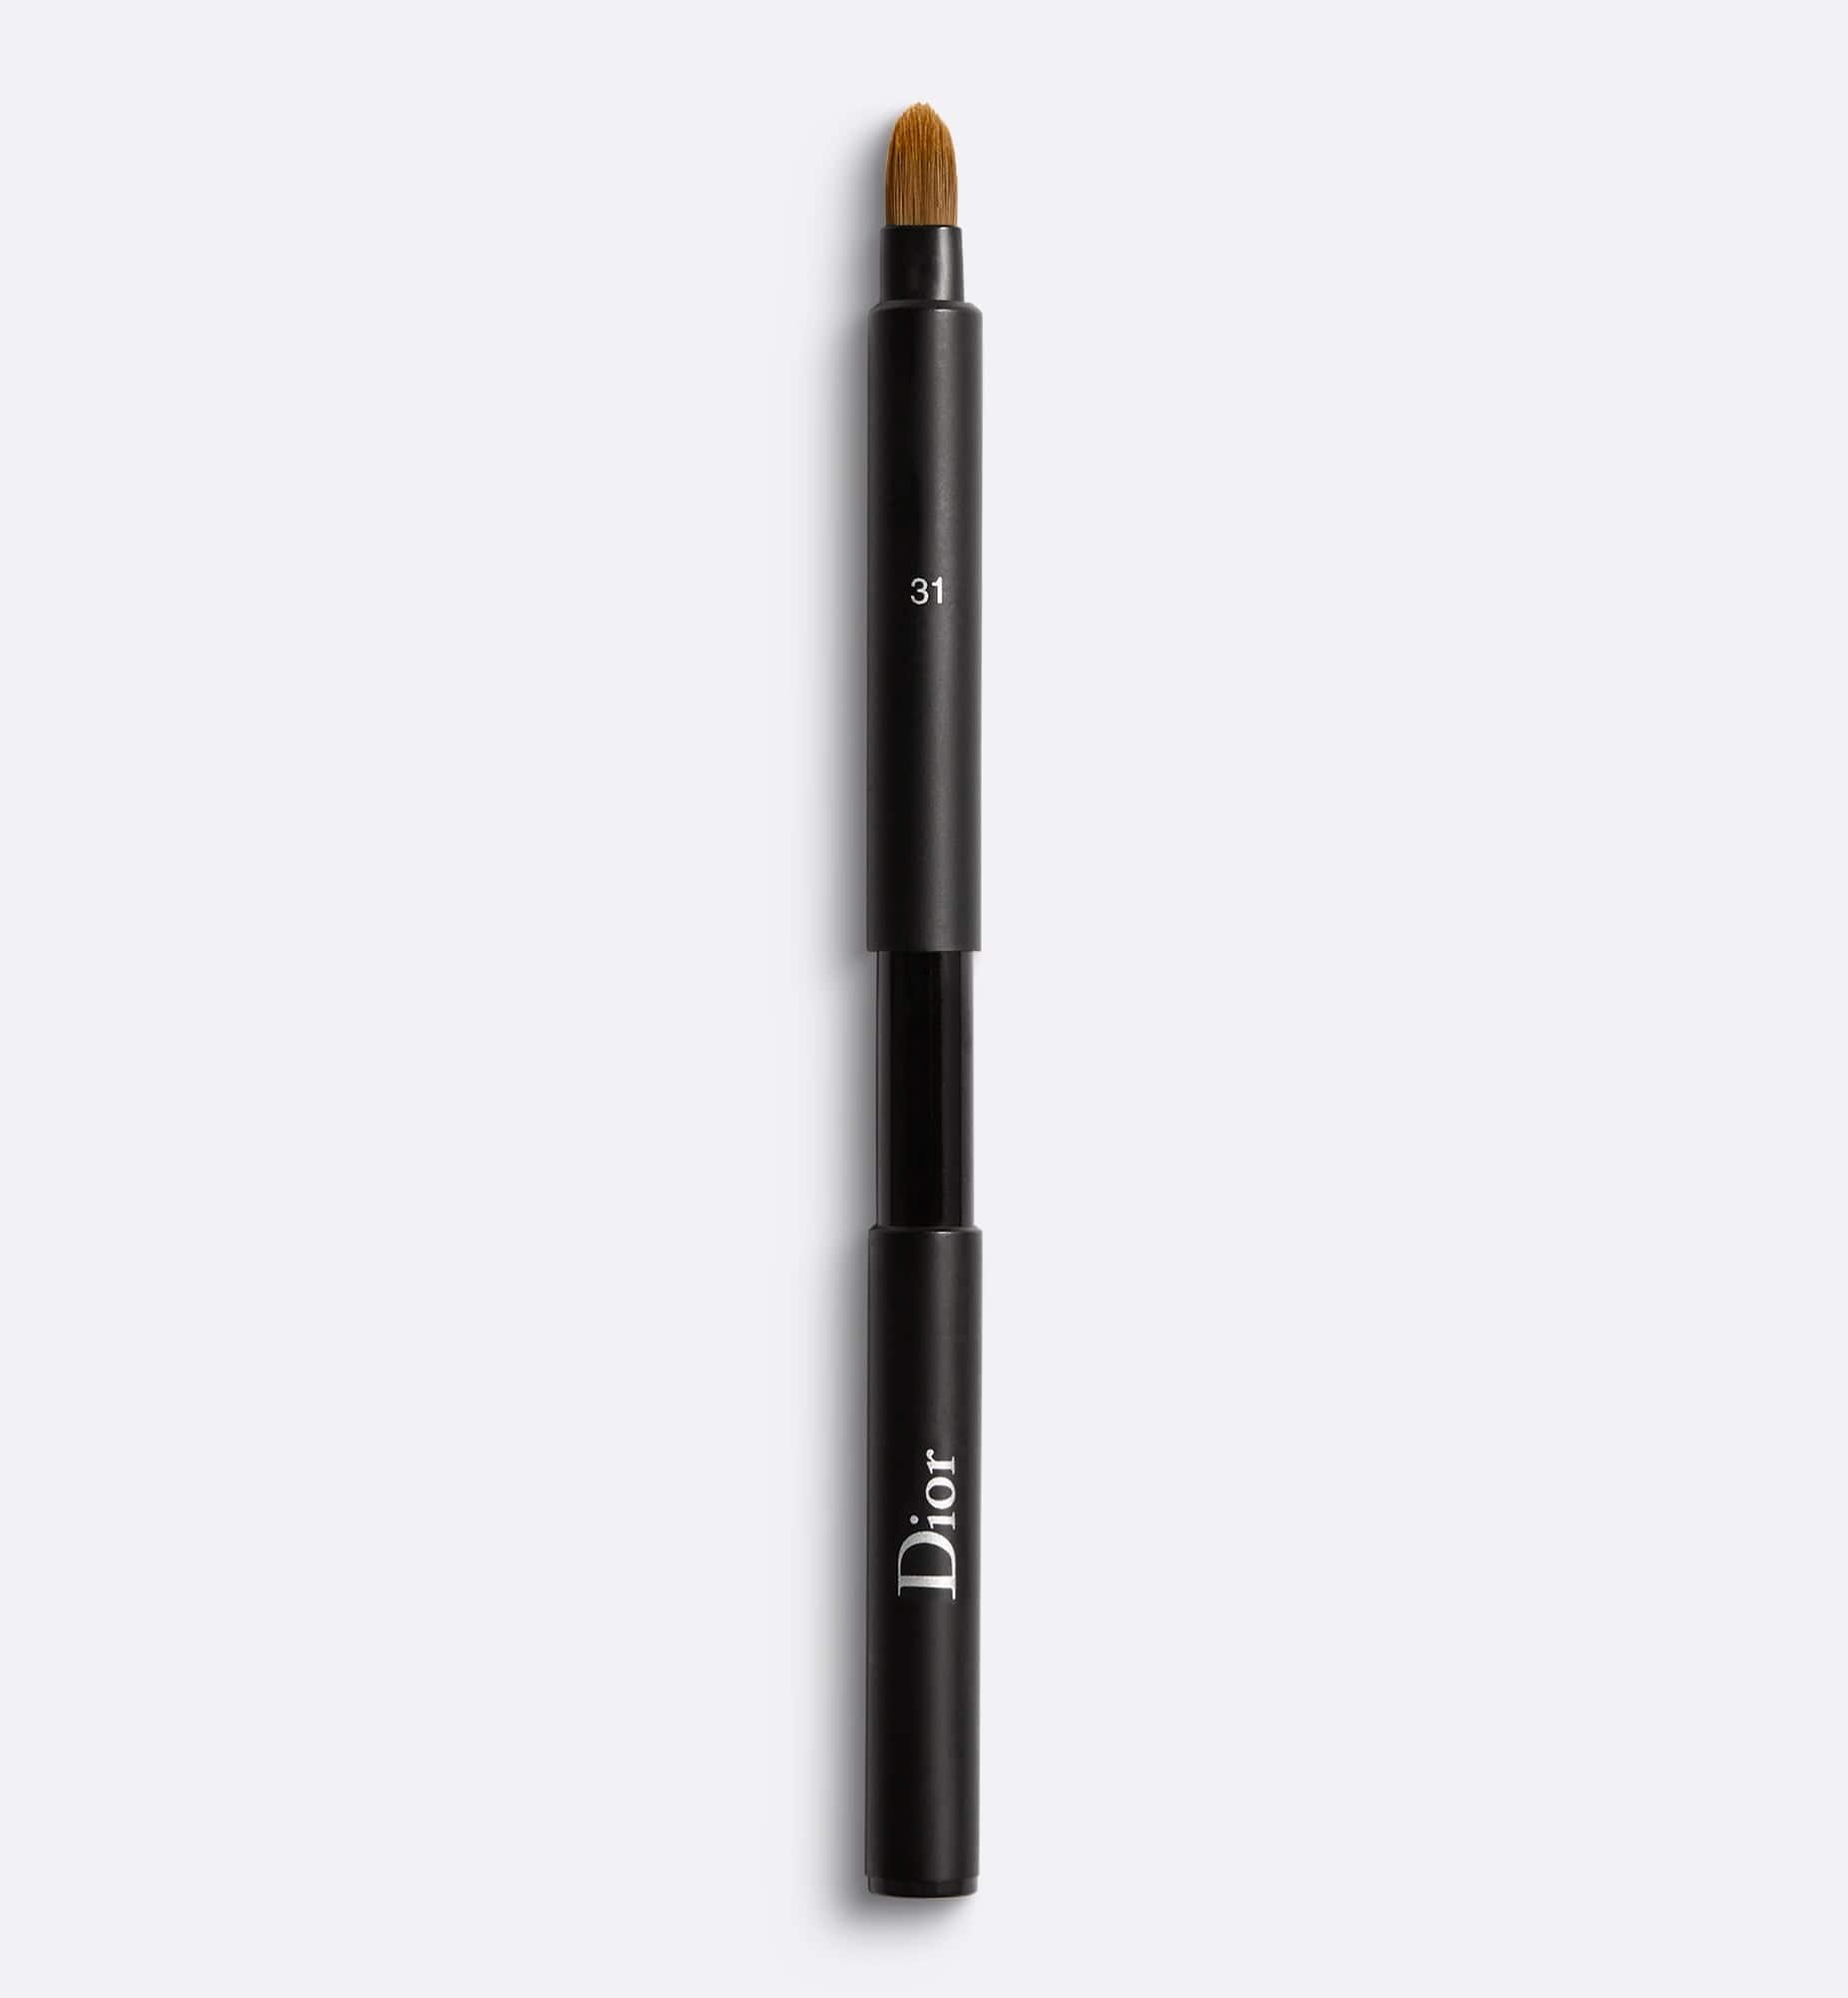 Dior Backstage Retractable Lip Brush N°31 | For Quick and Precise Lip Makeup